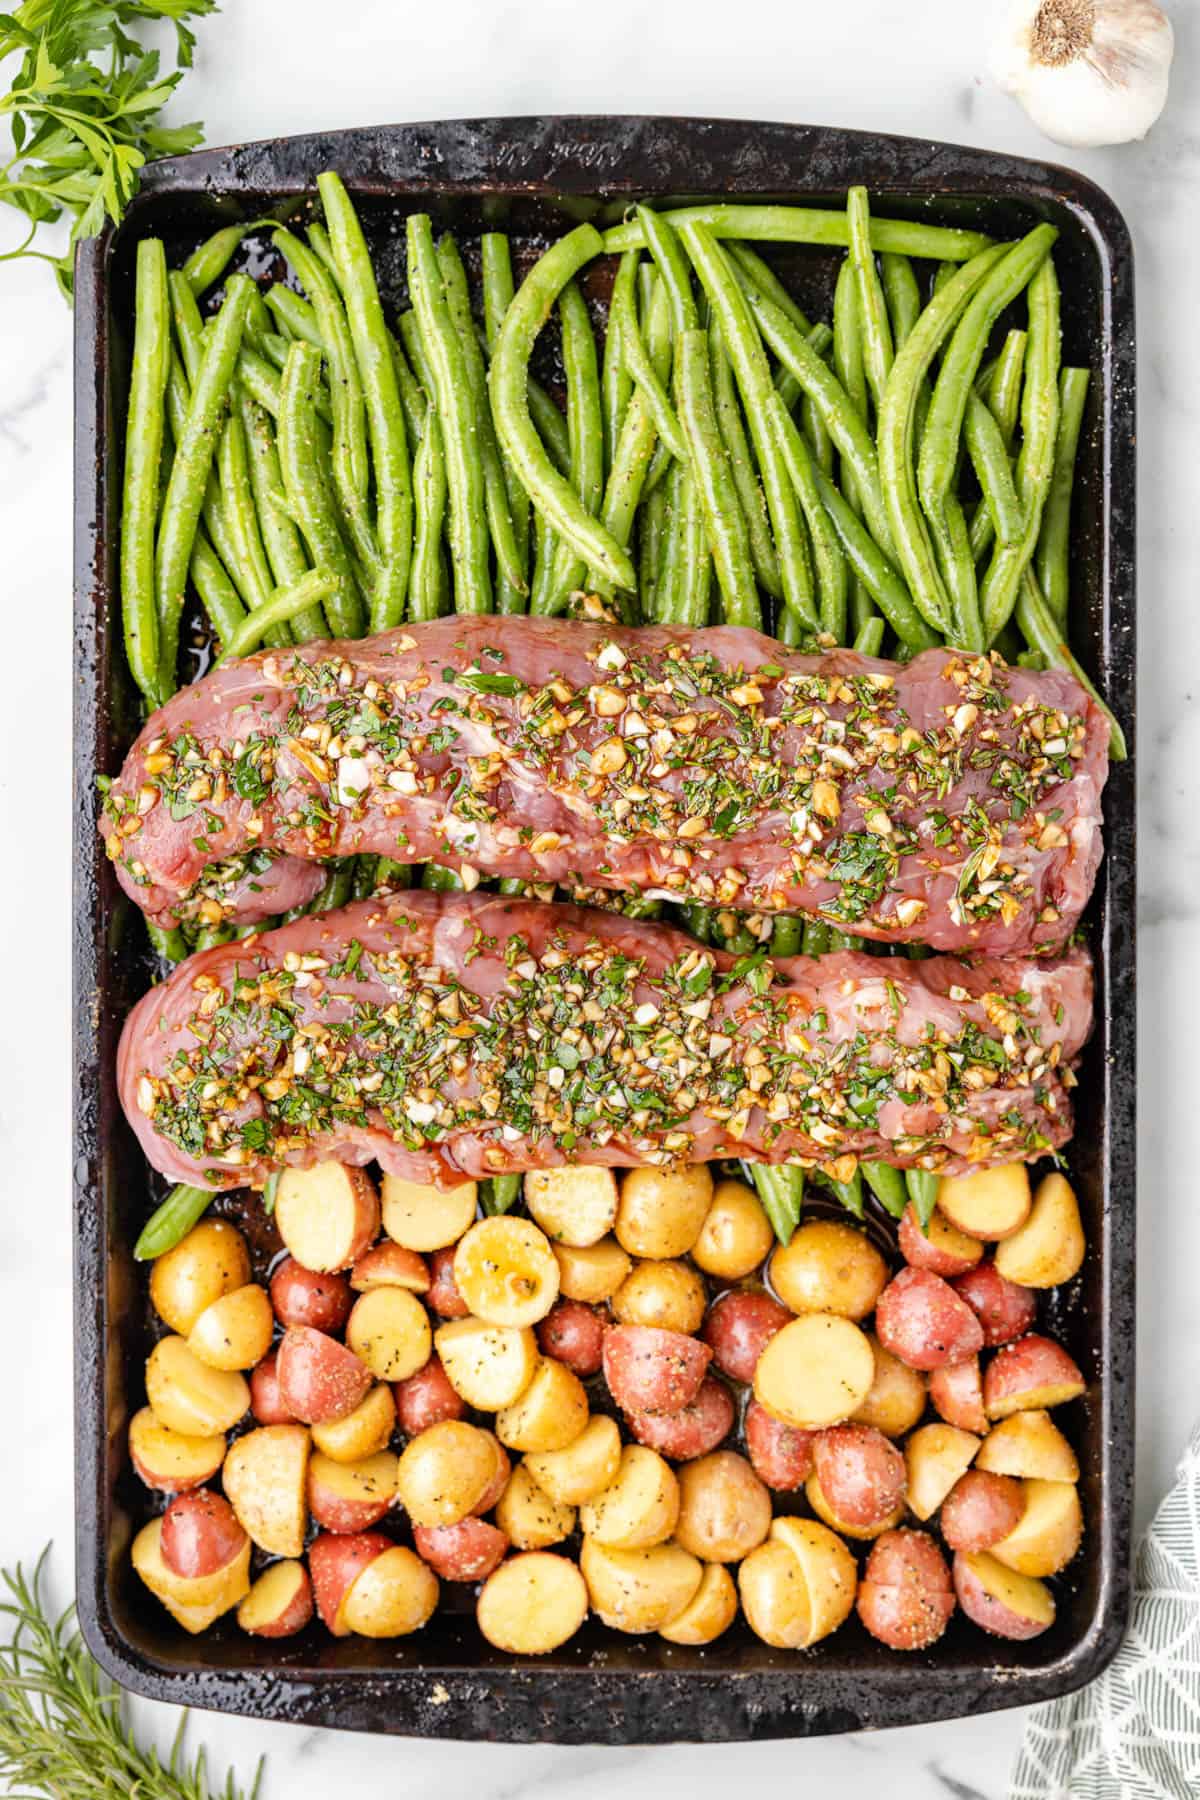 Two pork tenderloin roasts covered in an herb sauce on a sheet pan with potatoes and green beans for roasting.